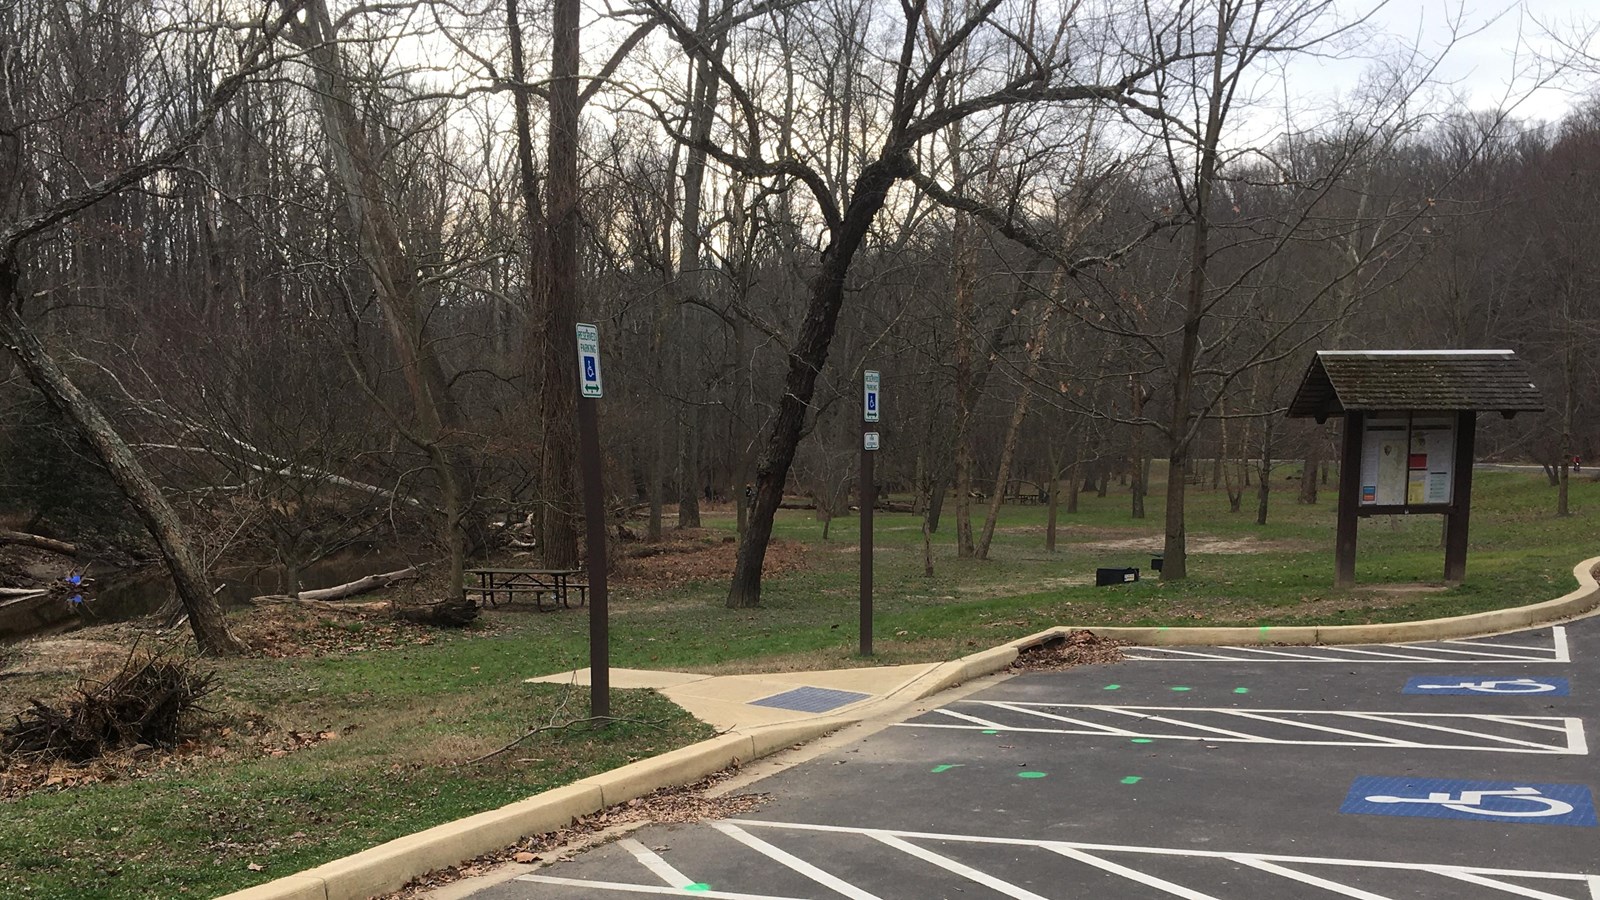 A series of parking spaces and a bulletin board with a table visible by trees beyond it.